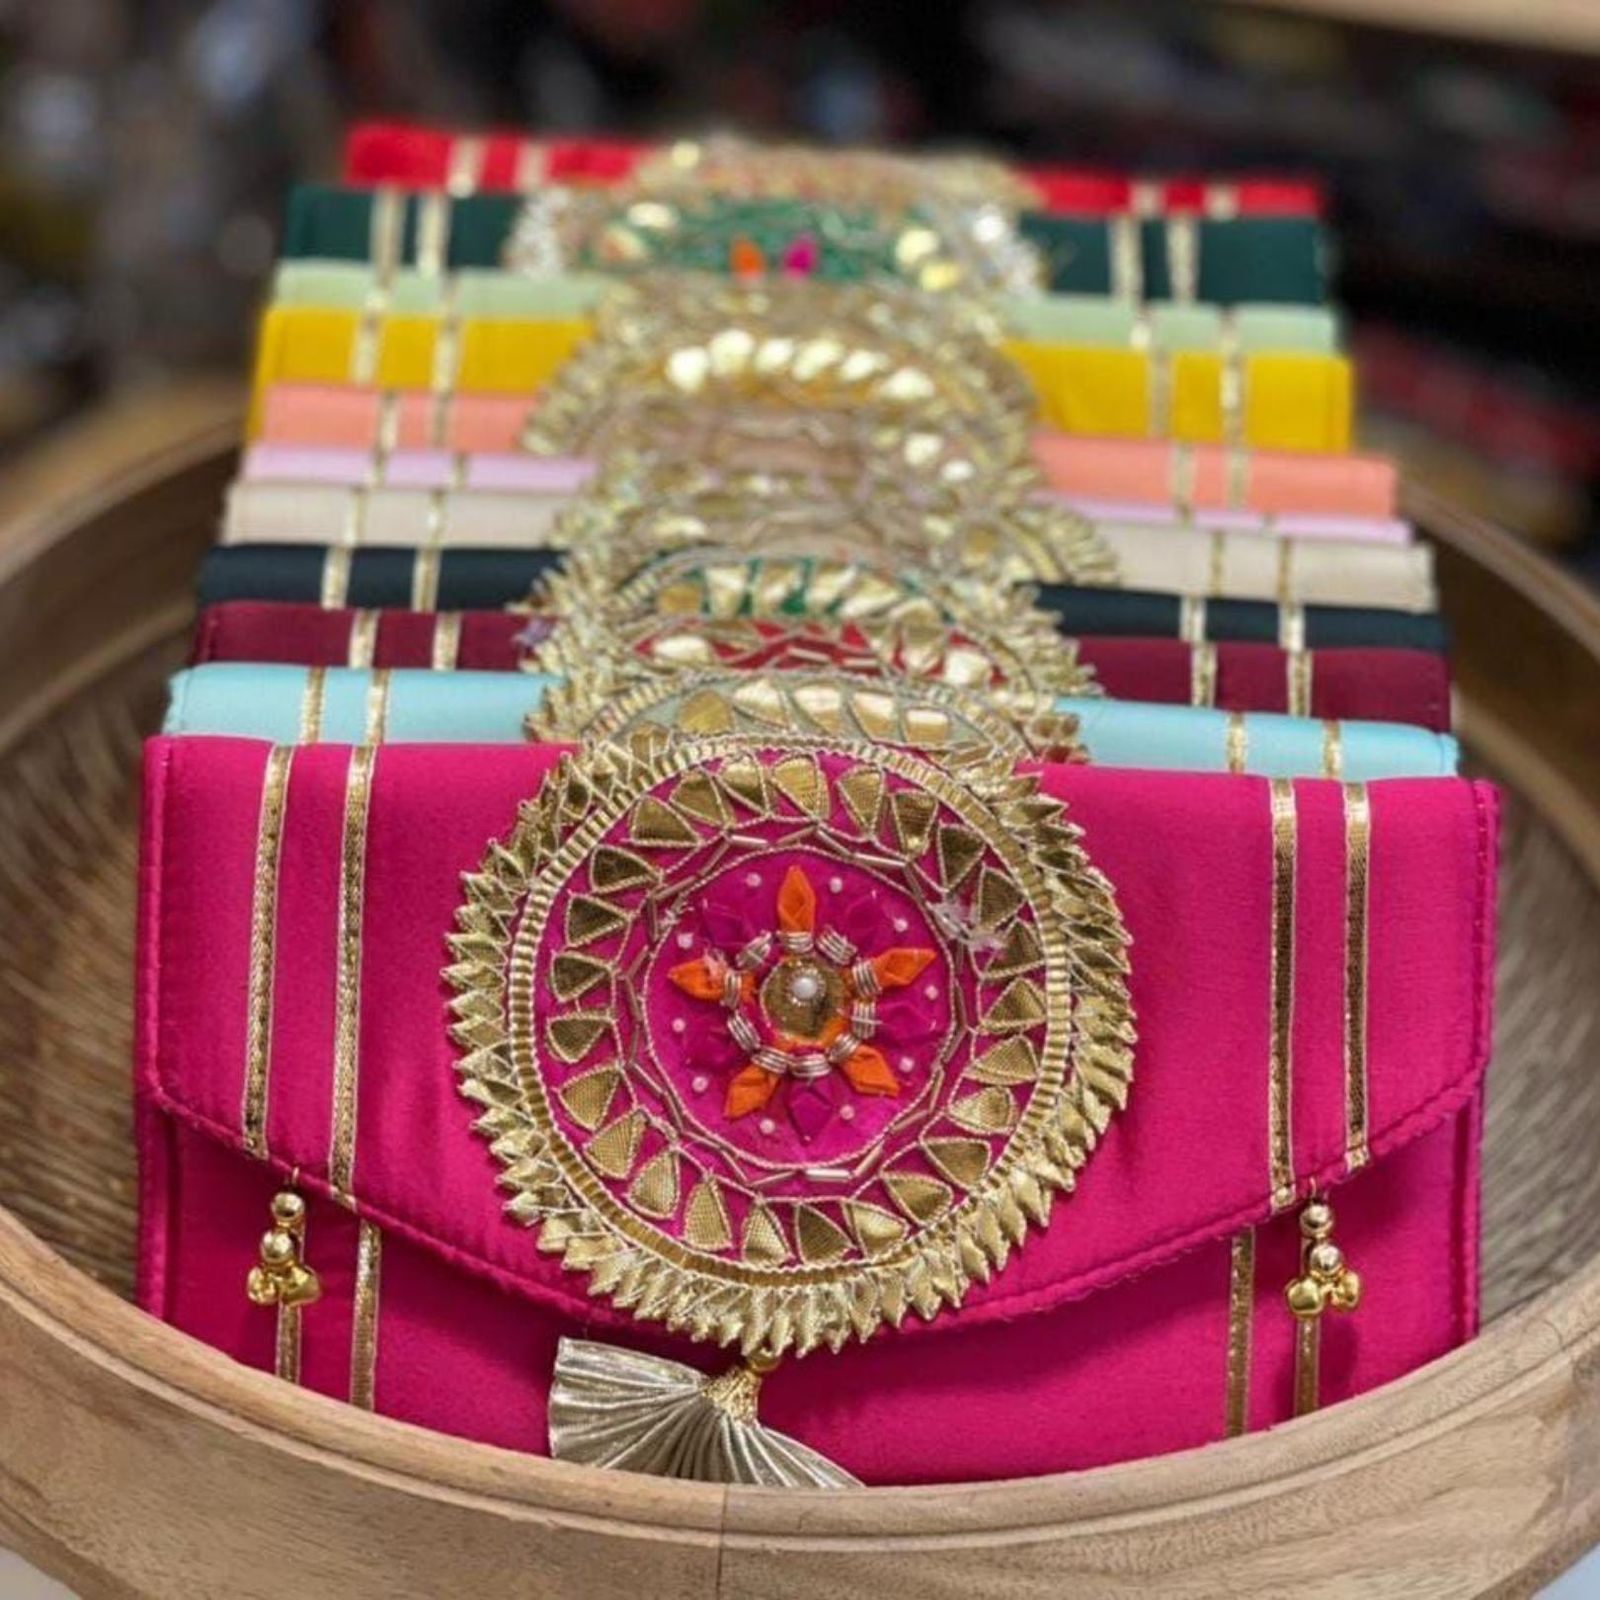 Multicolor Cotton Rajasthani Side Bag, 290g, Size: 11X9inch at Rs 50/piece  in Agra